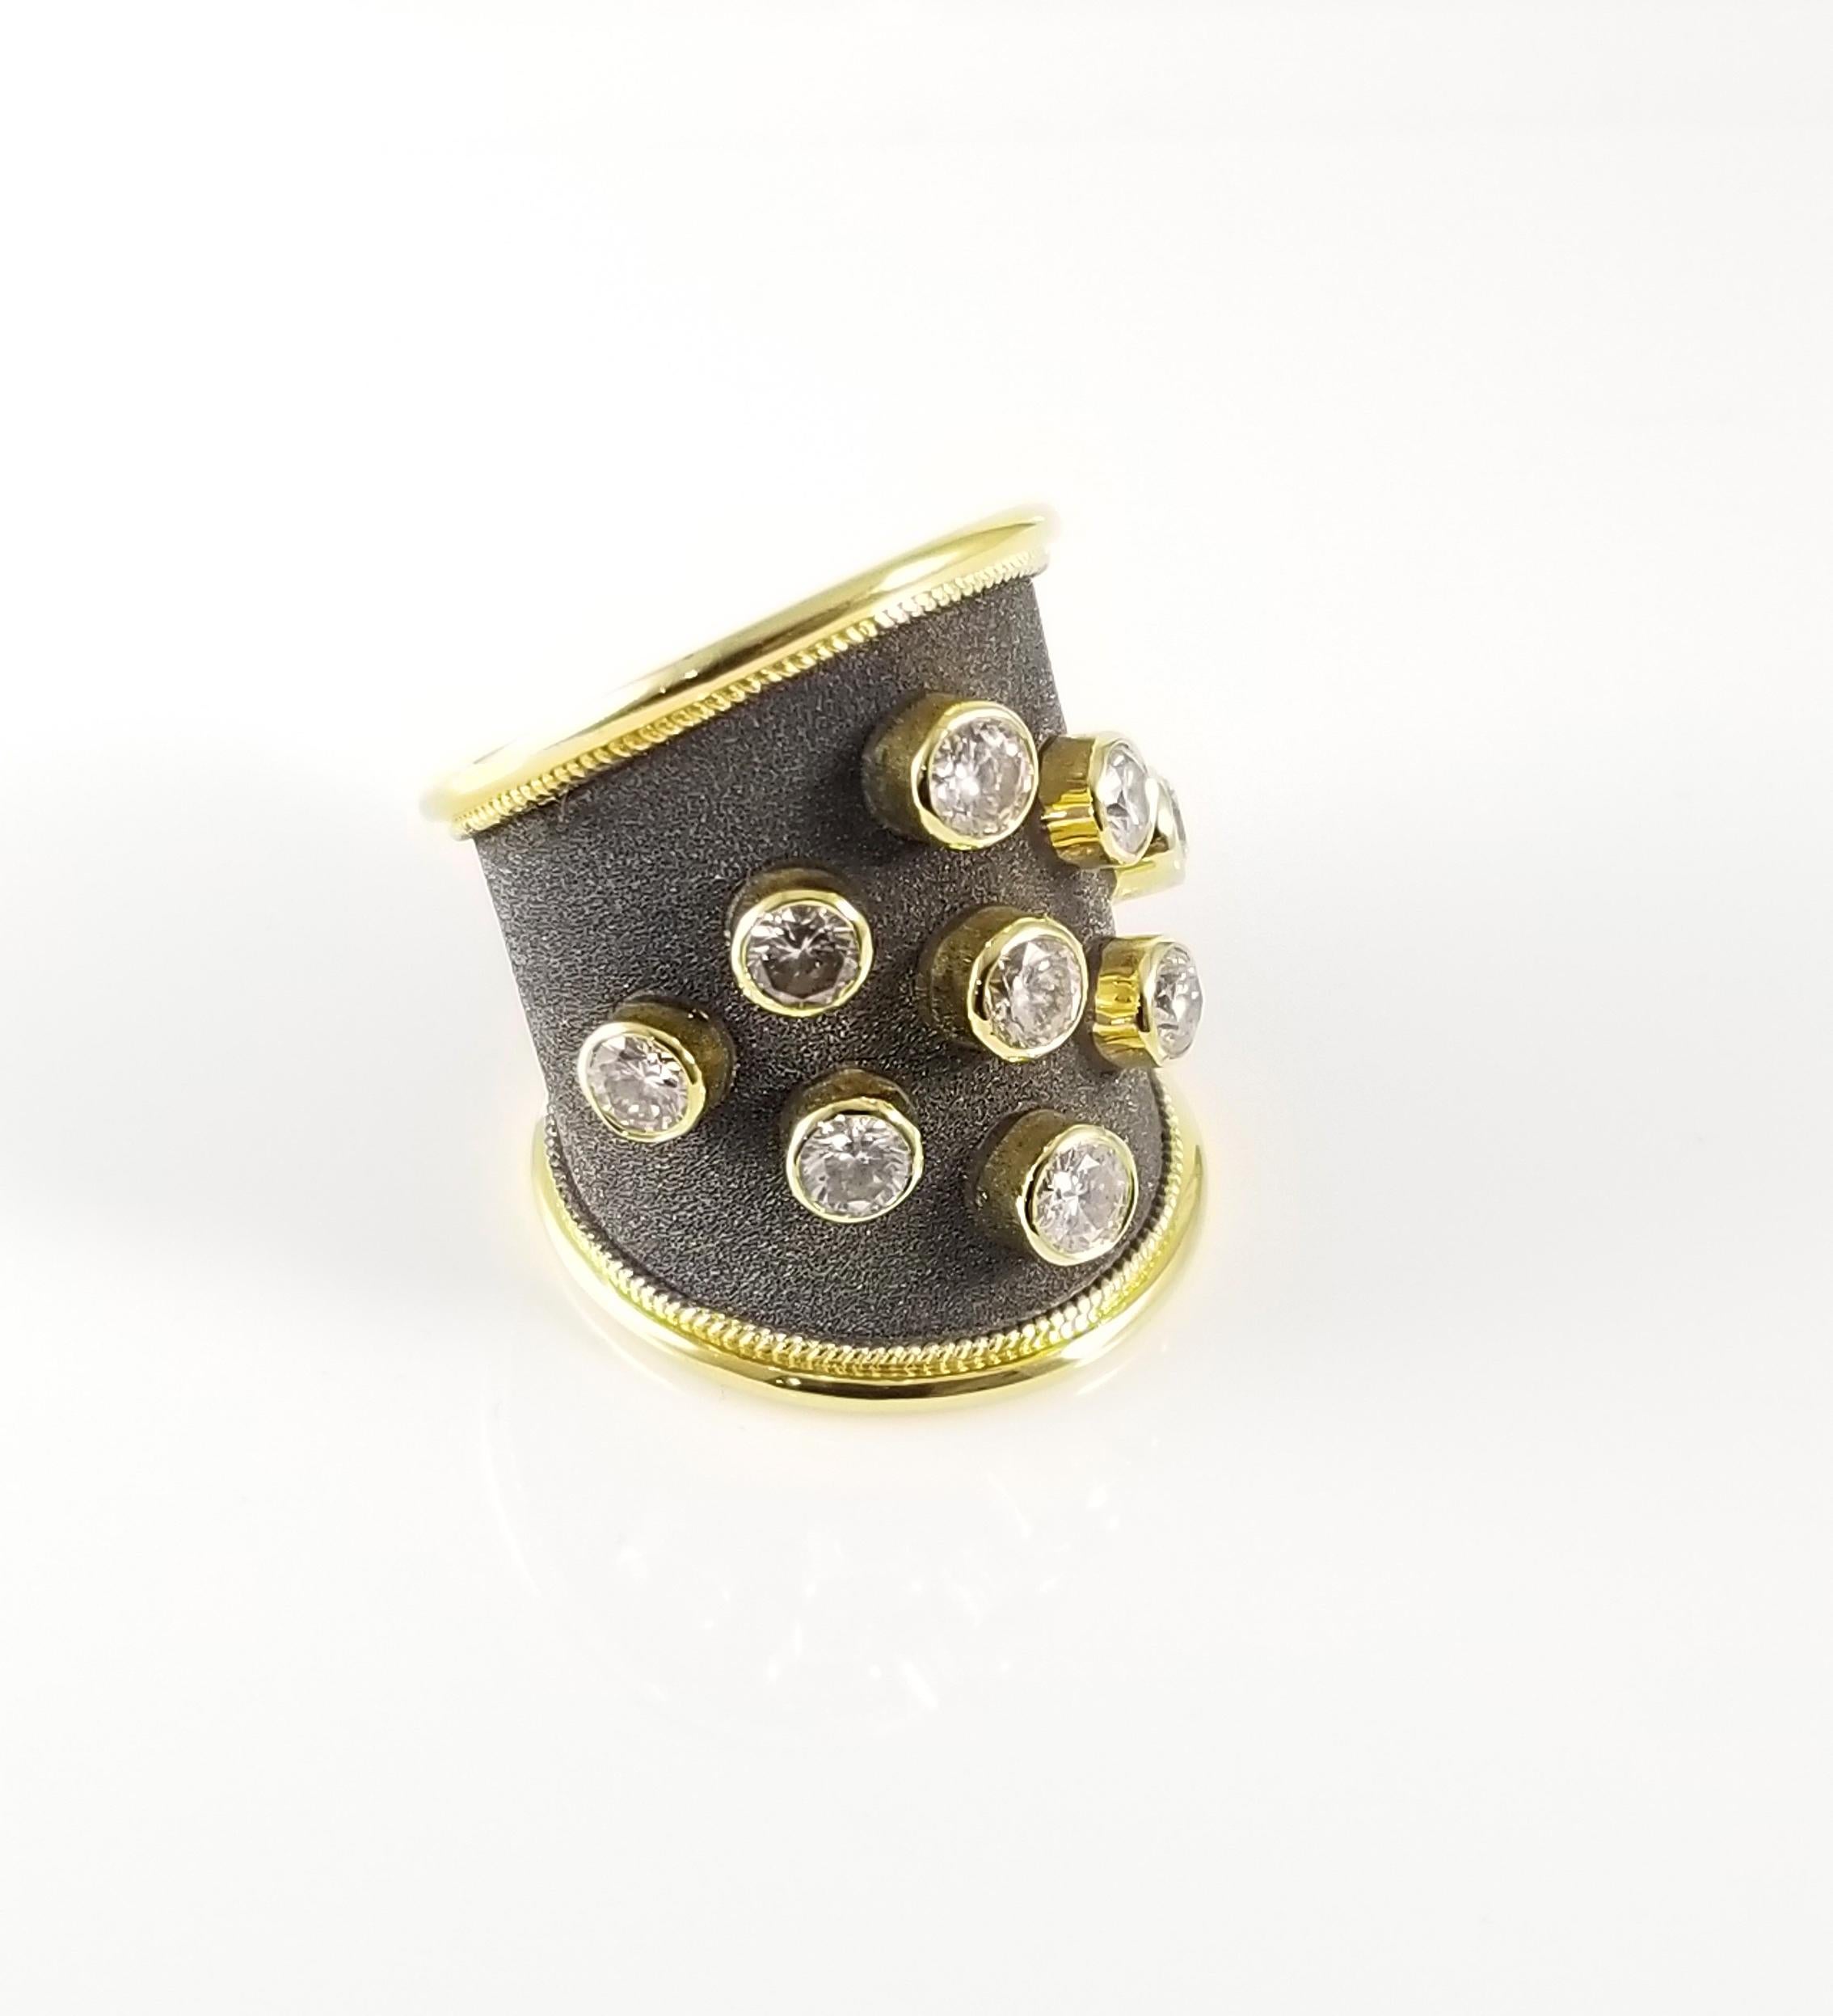 S.Georgios designer 18 Karat Yellow Gold Ring all handmade with Byzantine workmanship and the unique velvet look on the background, finished in Black Rhodium. The stunning ring features 9 Brilliant cut Diamond with a total weight of 2.02 Carat and